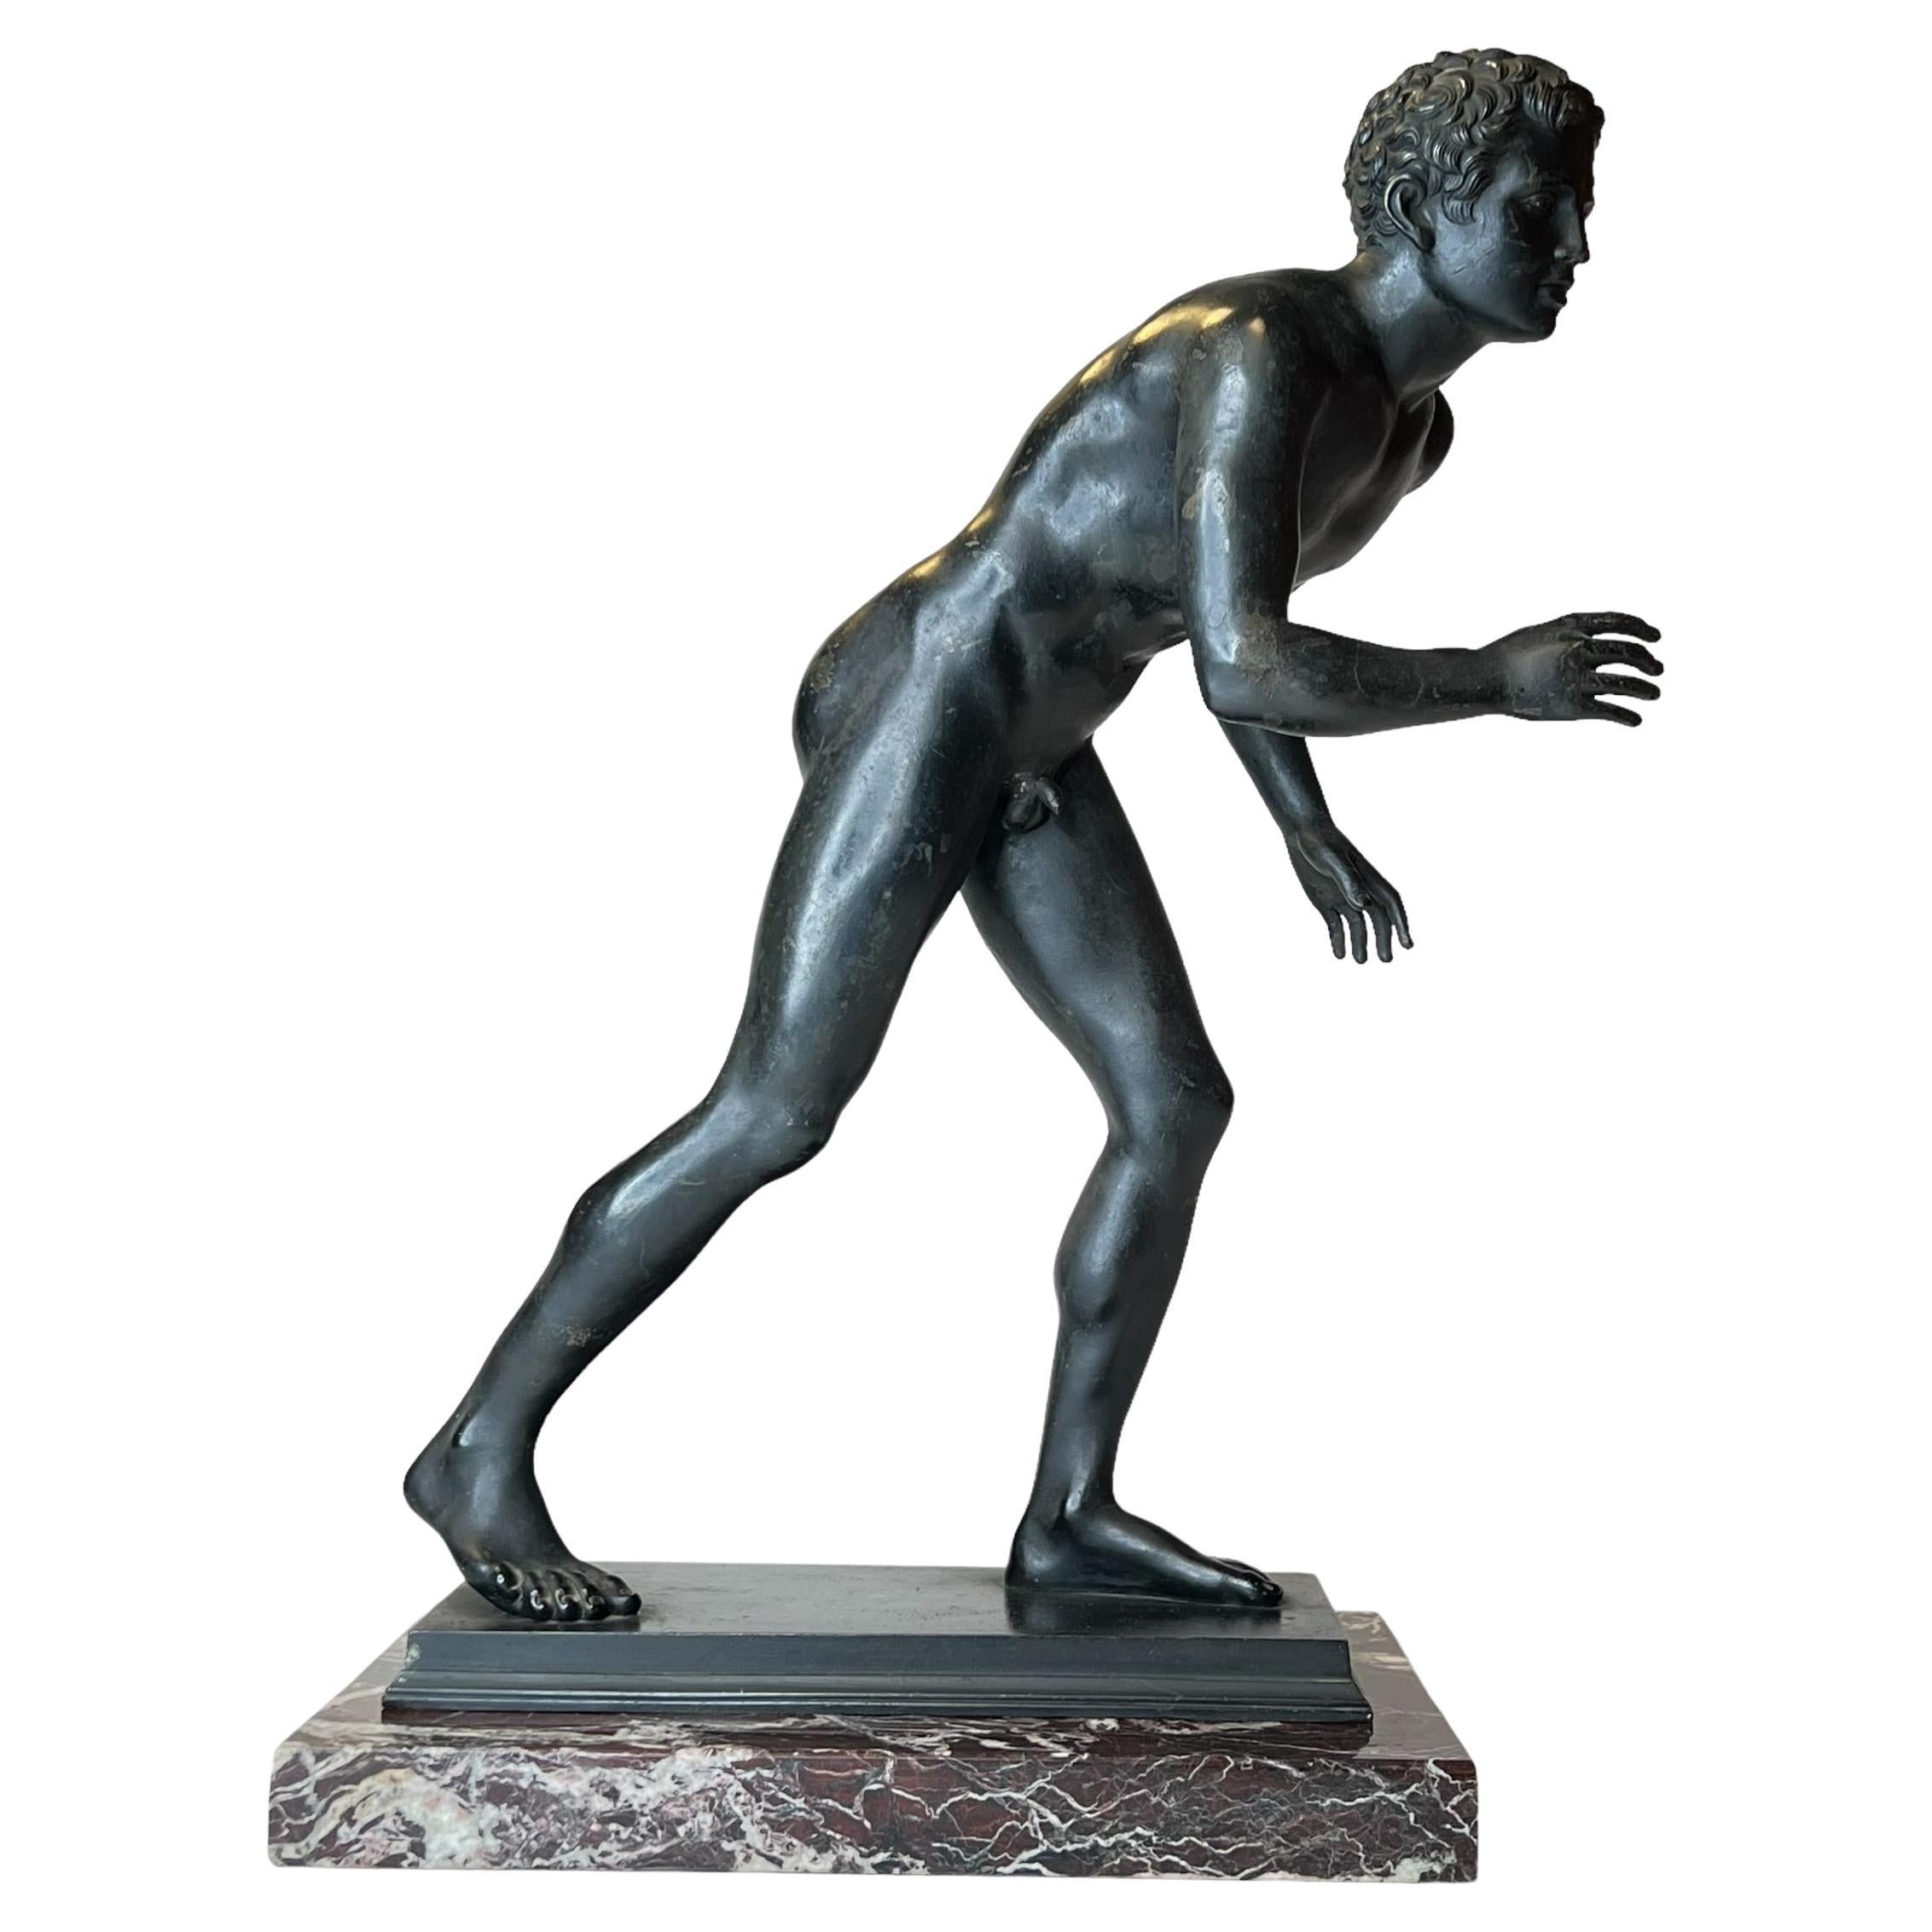 Grand Tour Bronze Sculpture of Athlete After Ancient from Villa of the Papyri